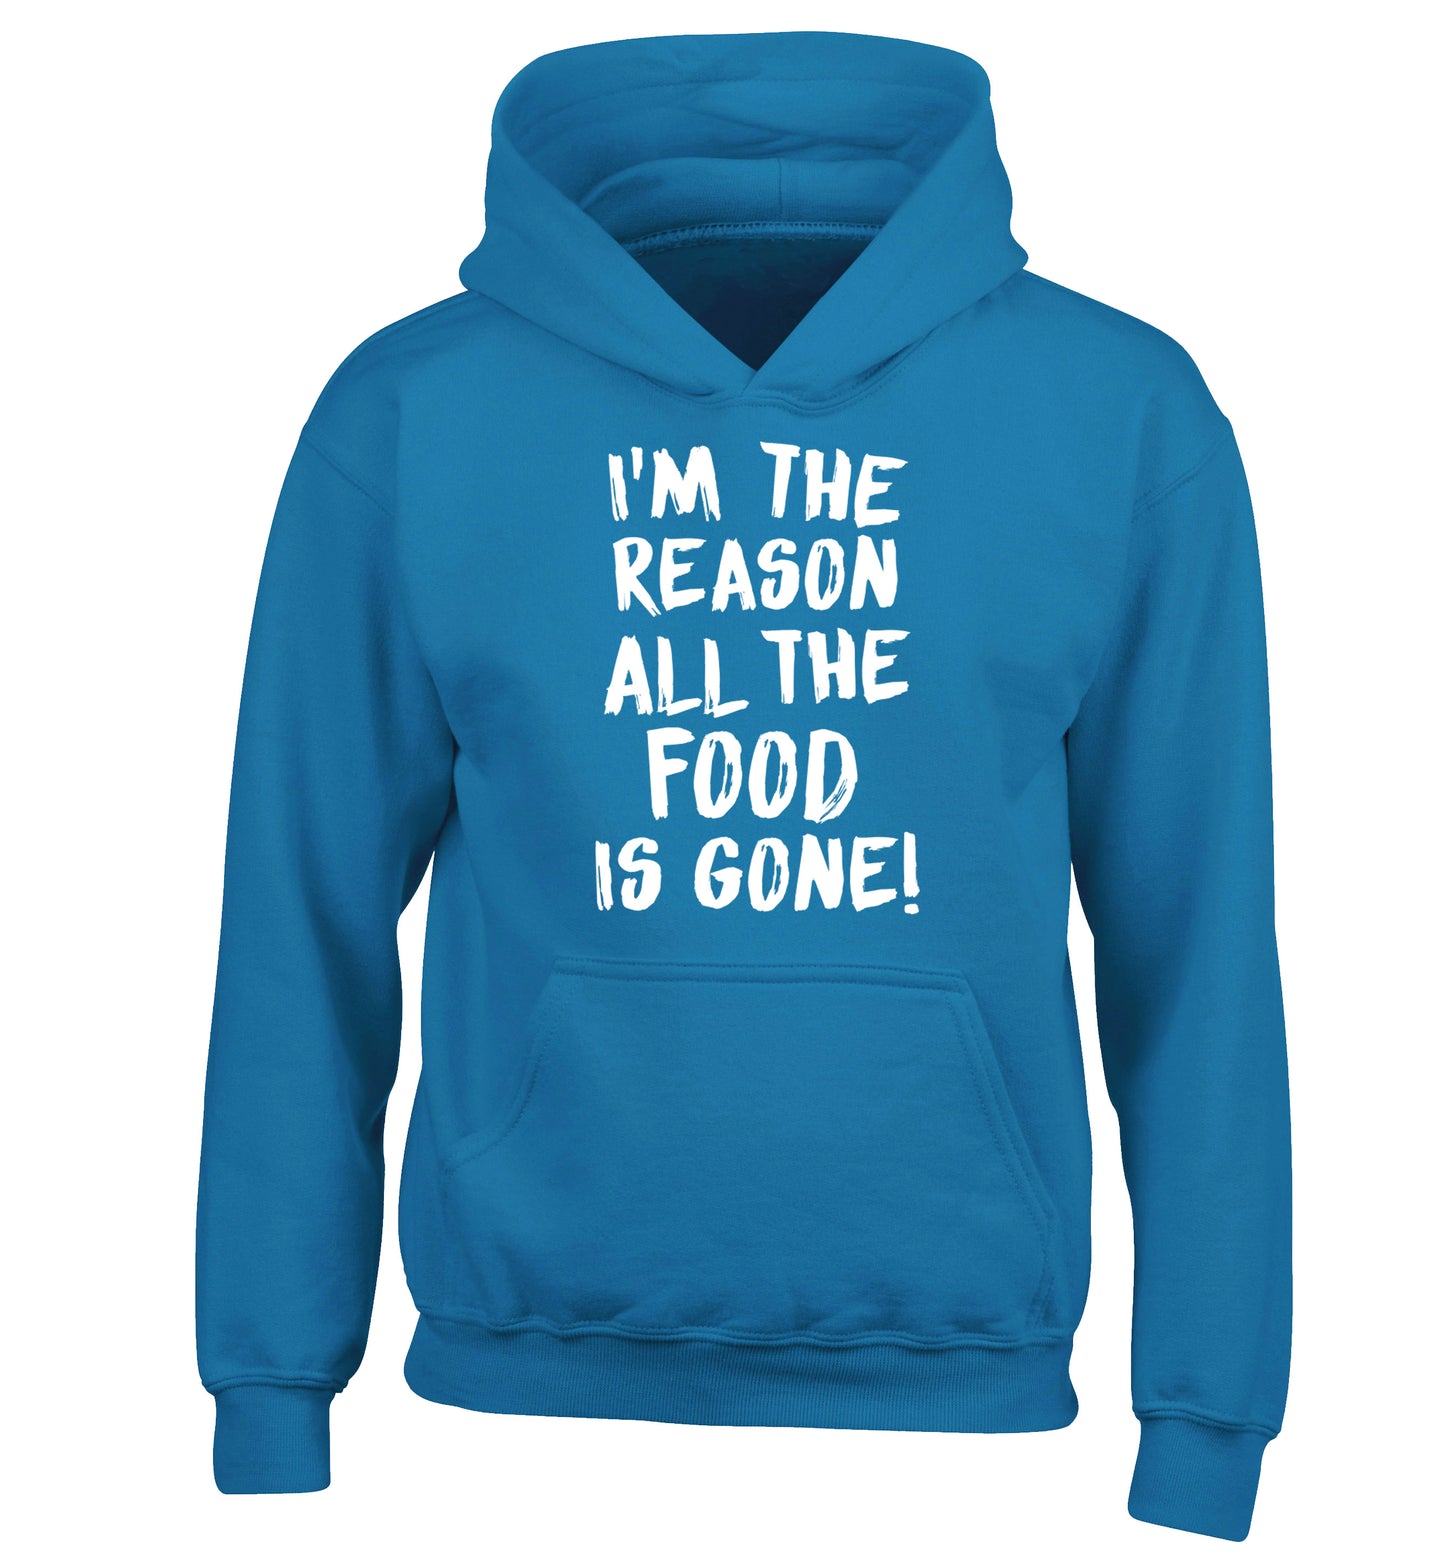 I'm the reason why all the food is gone children's blue hoodie 12-13 Years